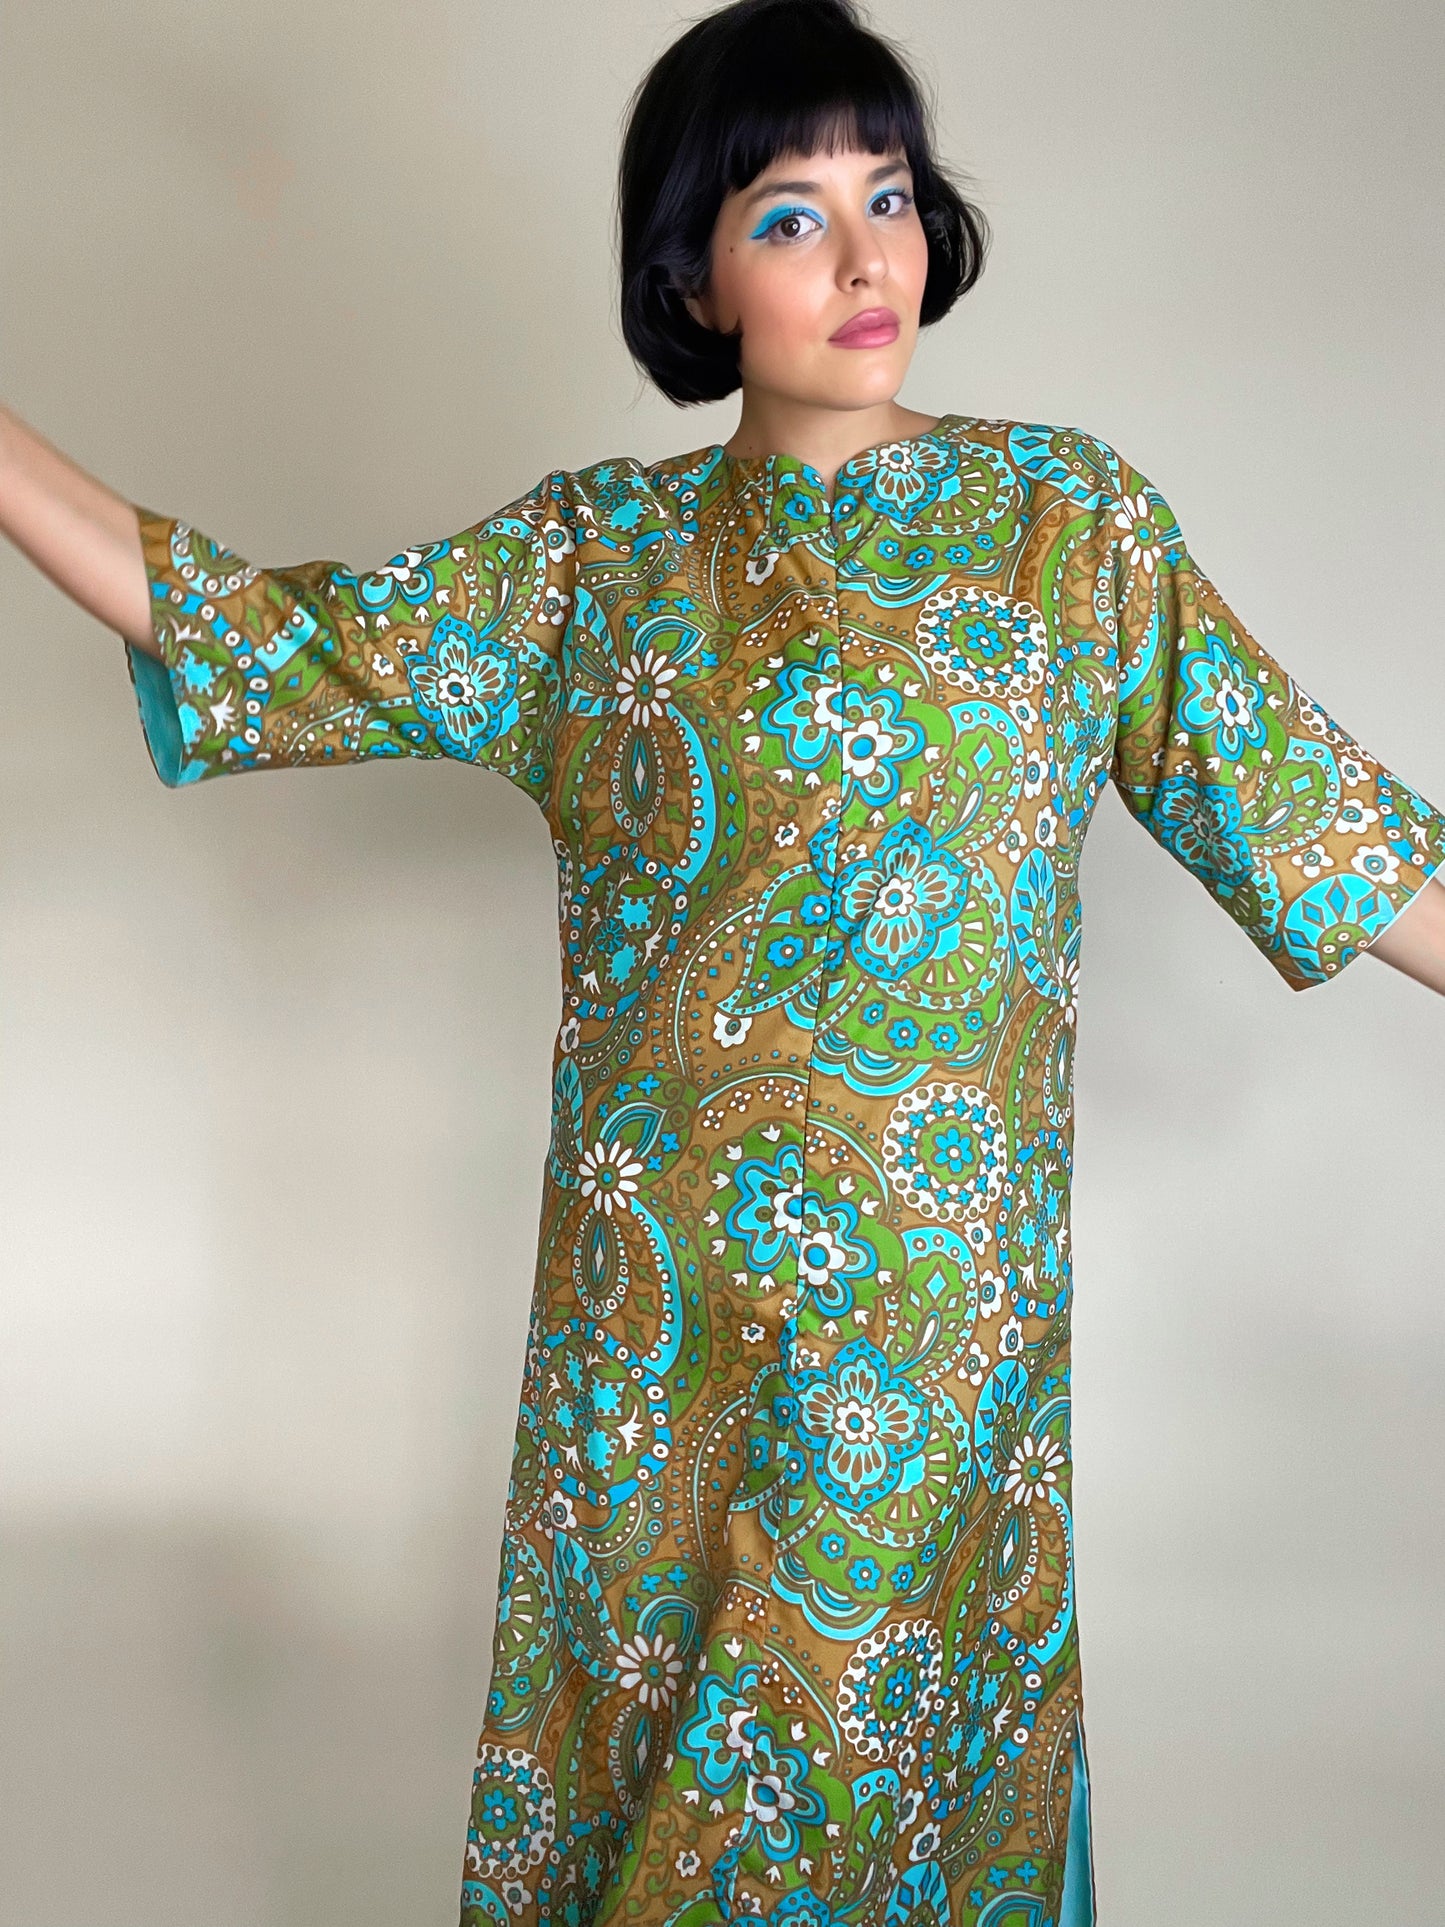 Vintage 60s Brown and Turquoise Floral Paisley Print Zip Up Dress with Side Slit Fits Sizes XS-M